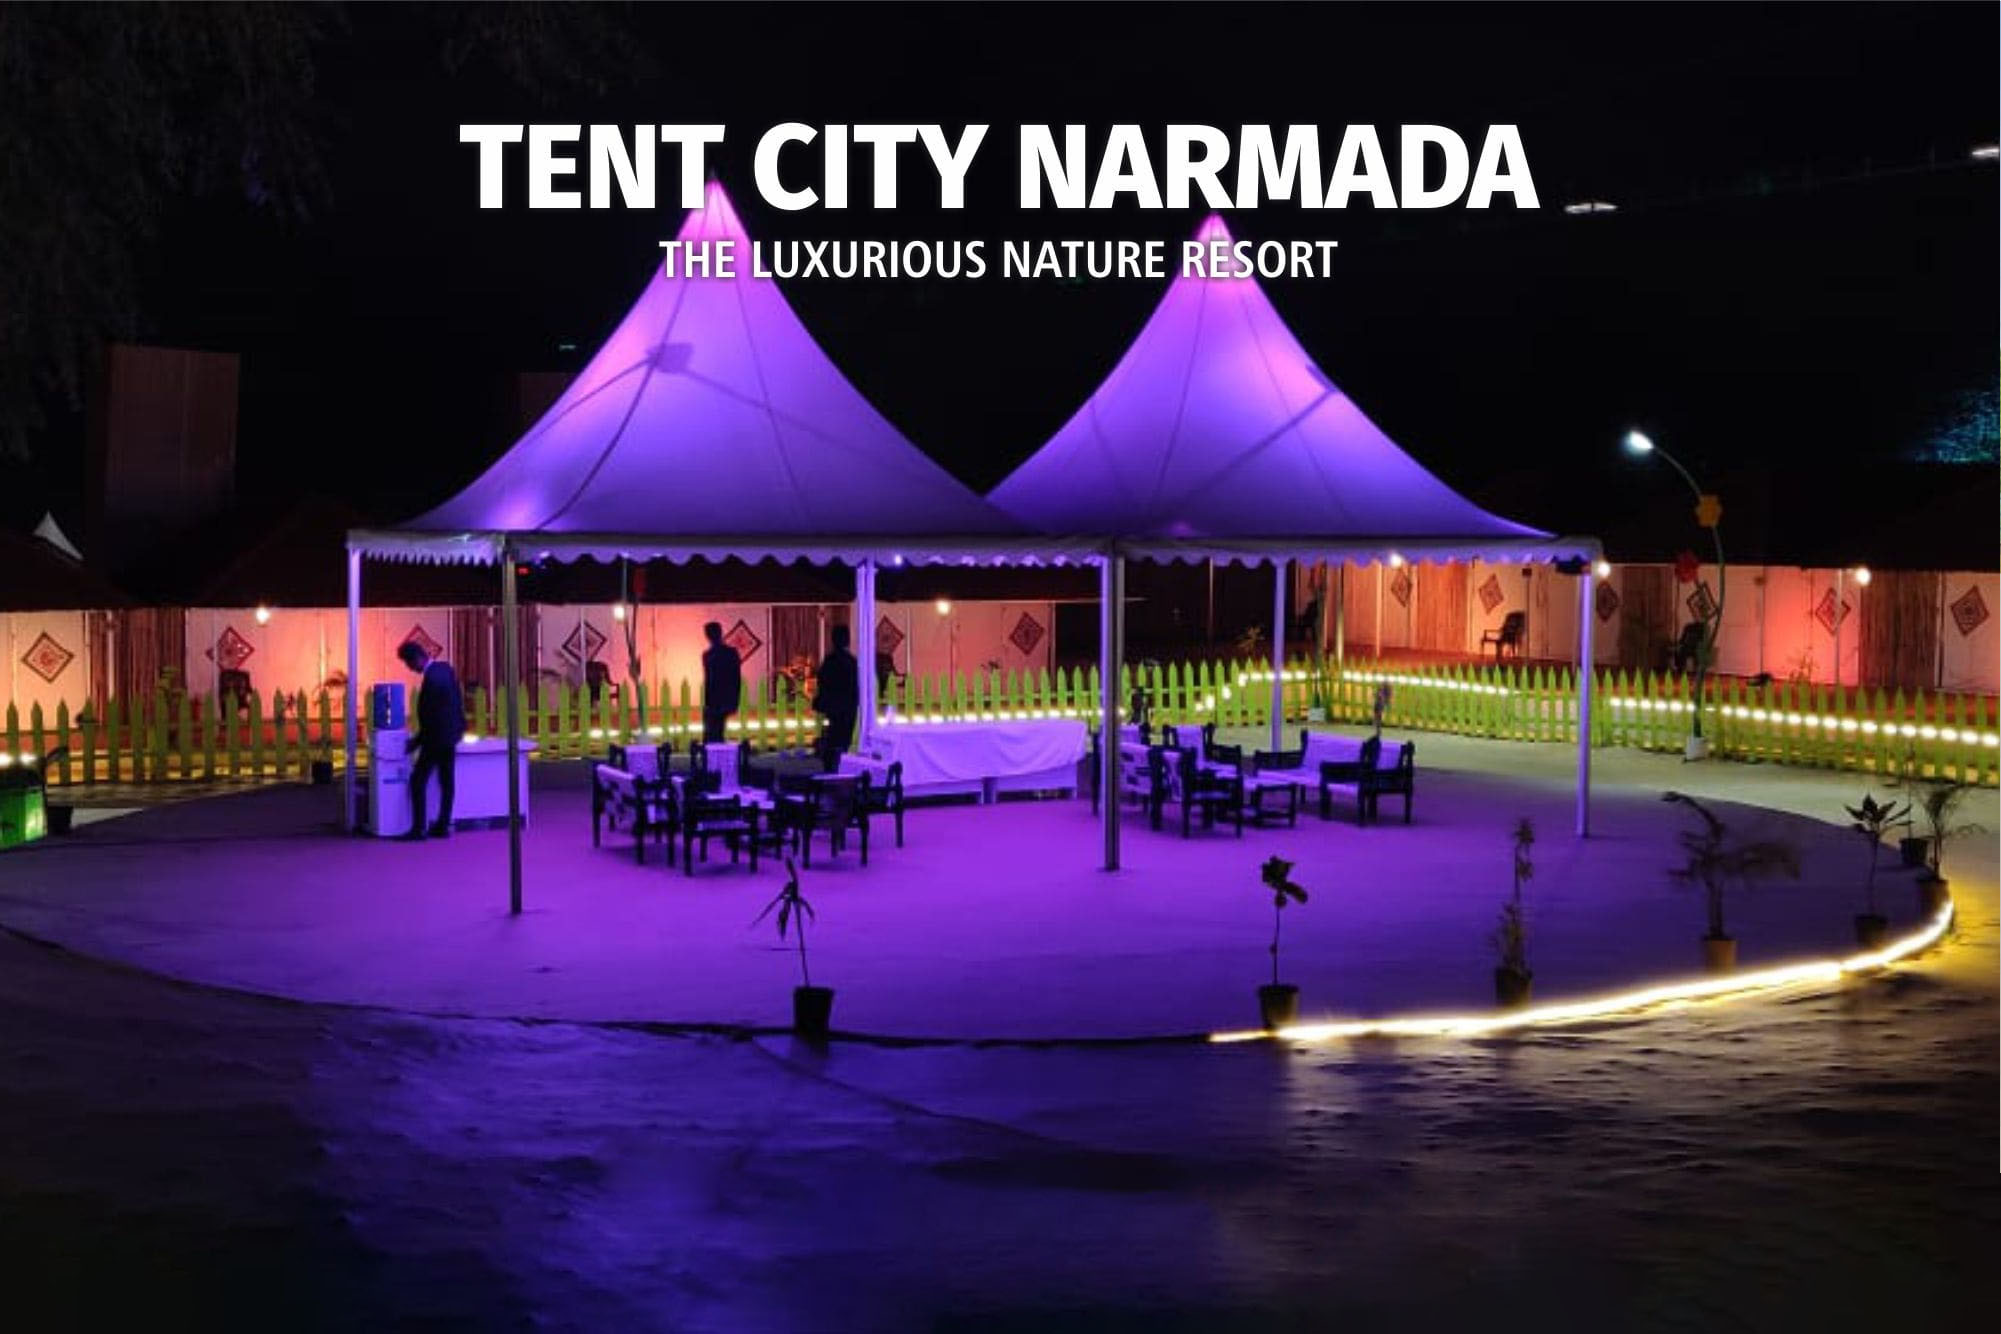 <span  class="uc_style_uc_tiles_grid_image_elementor_uc_items_attribute_title" style="color:#ffffff;">Tent City Narmada Gallery</span>